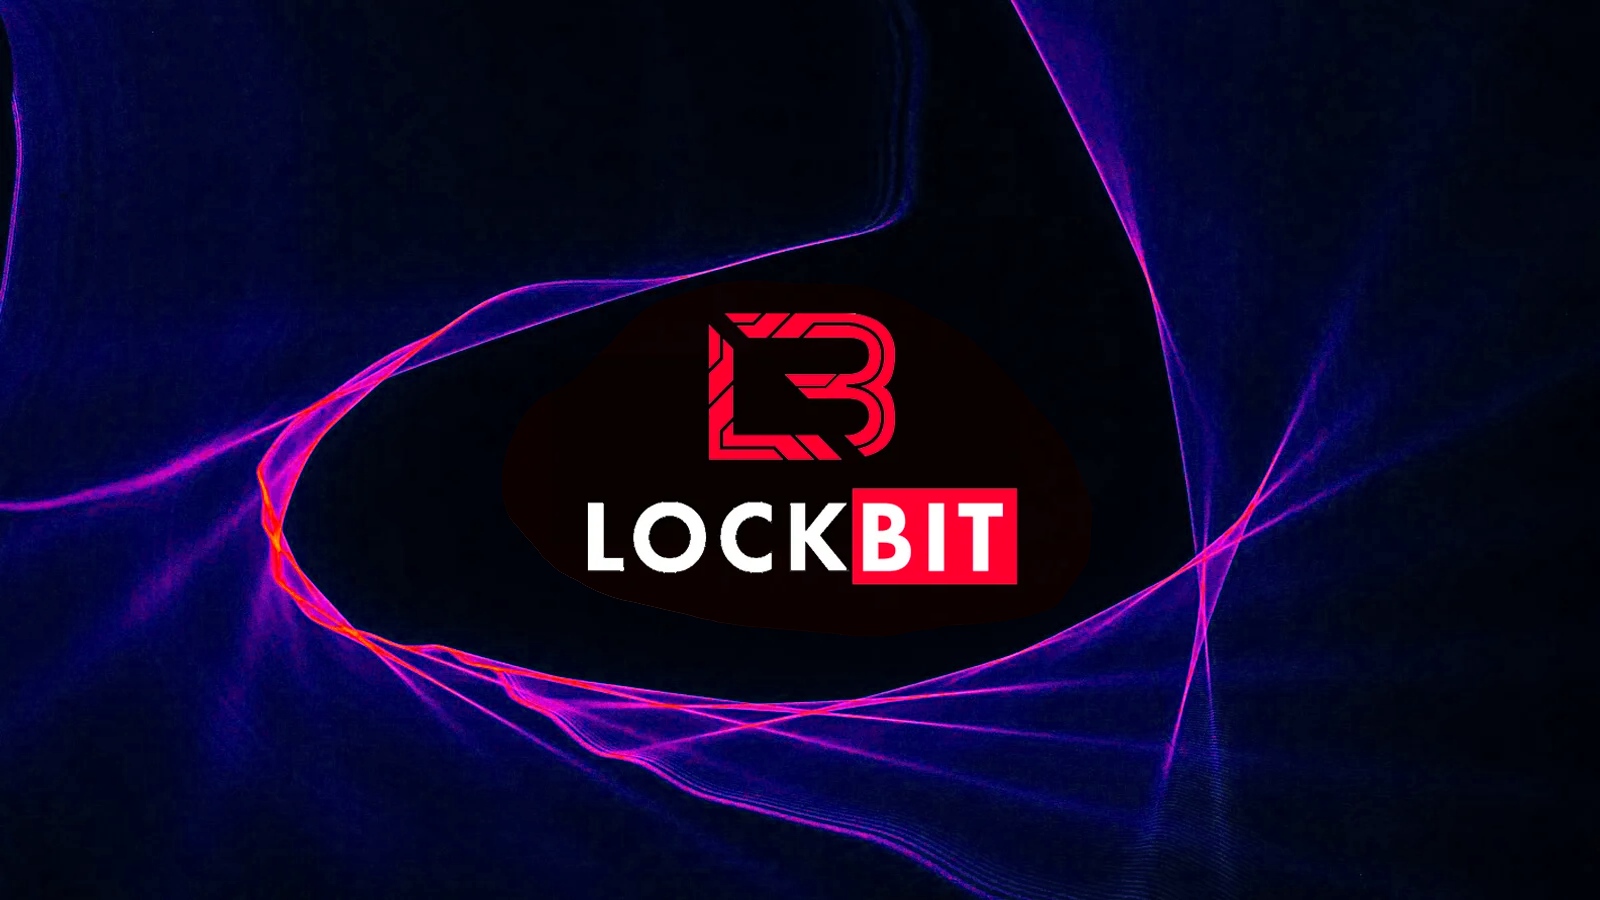 LockBit Ransomware Gang Claims Cyberattack On Indian Broker Motilal Oswal